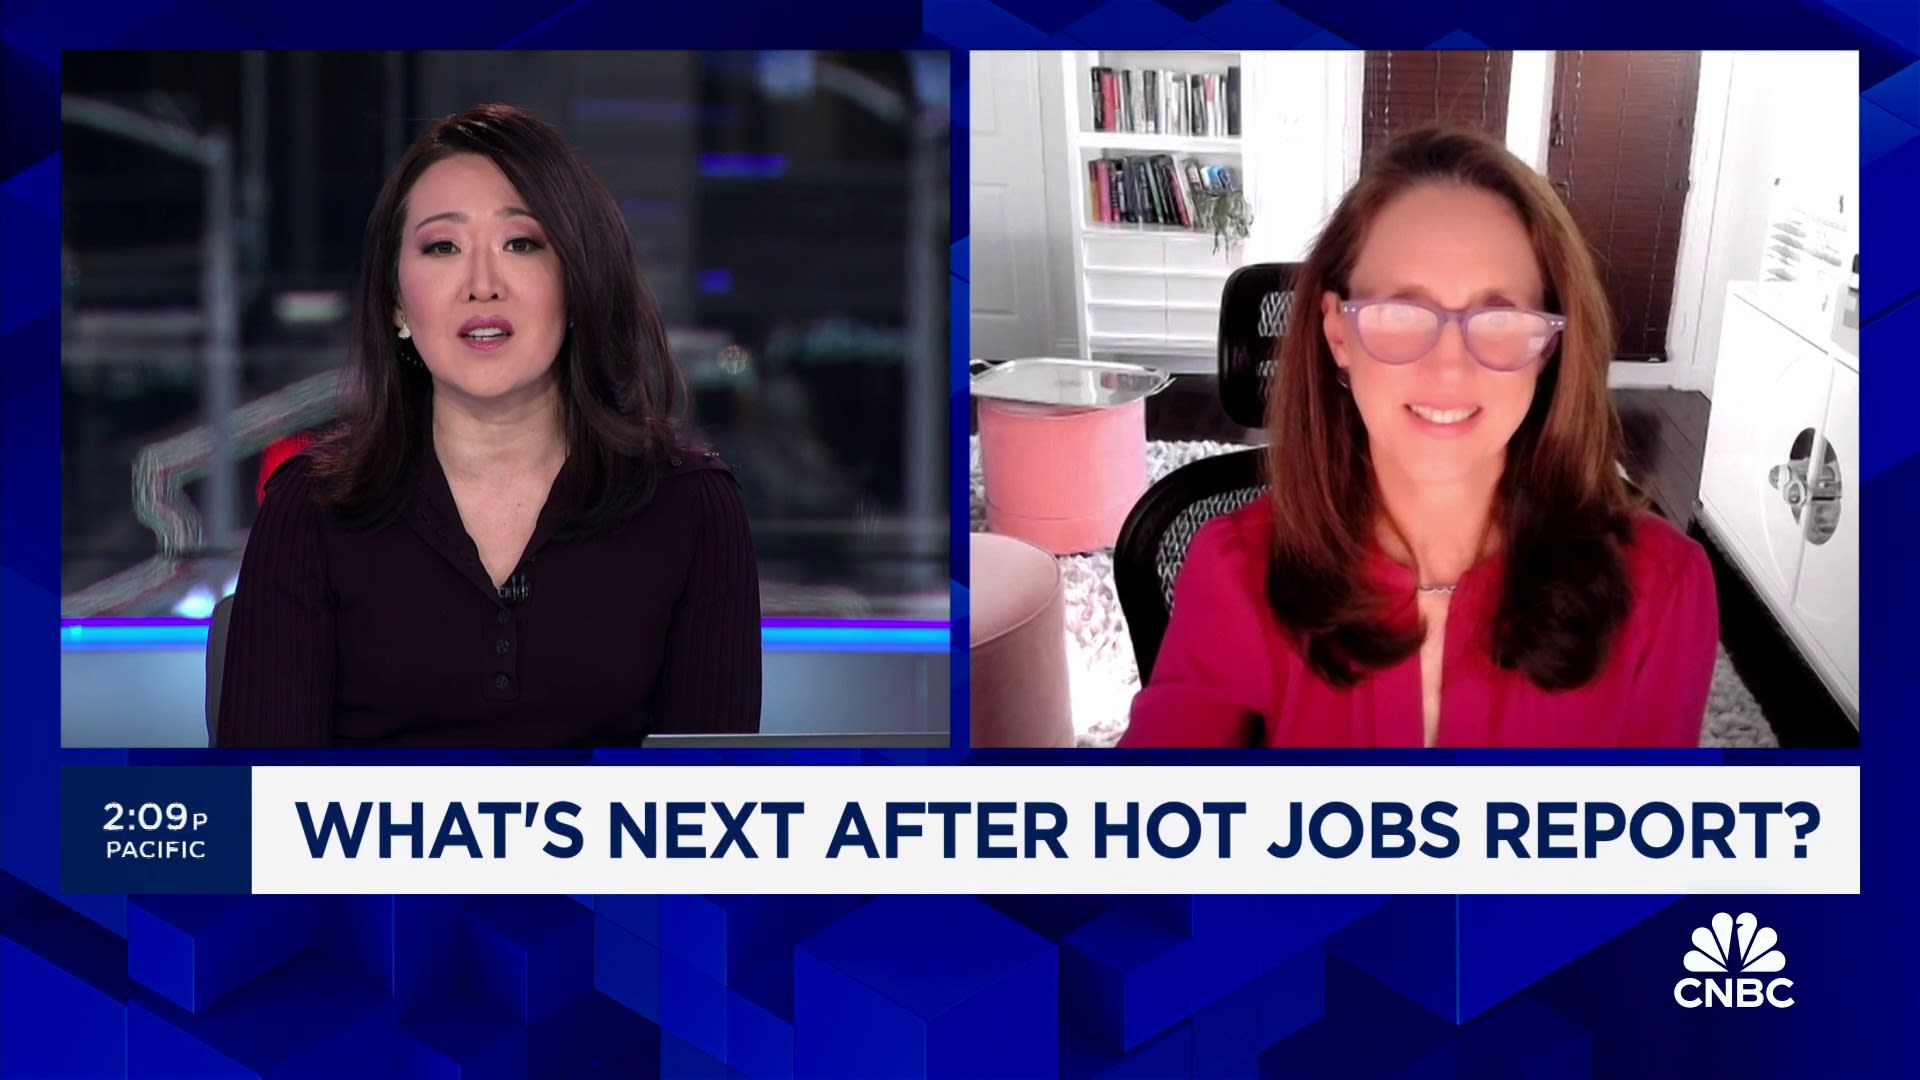 The Fed will likely cut rates three times this year, says MacroPolicy’s Constance Hunter [Video]